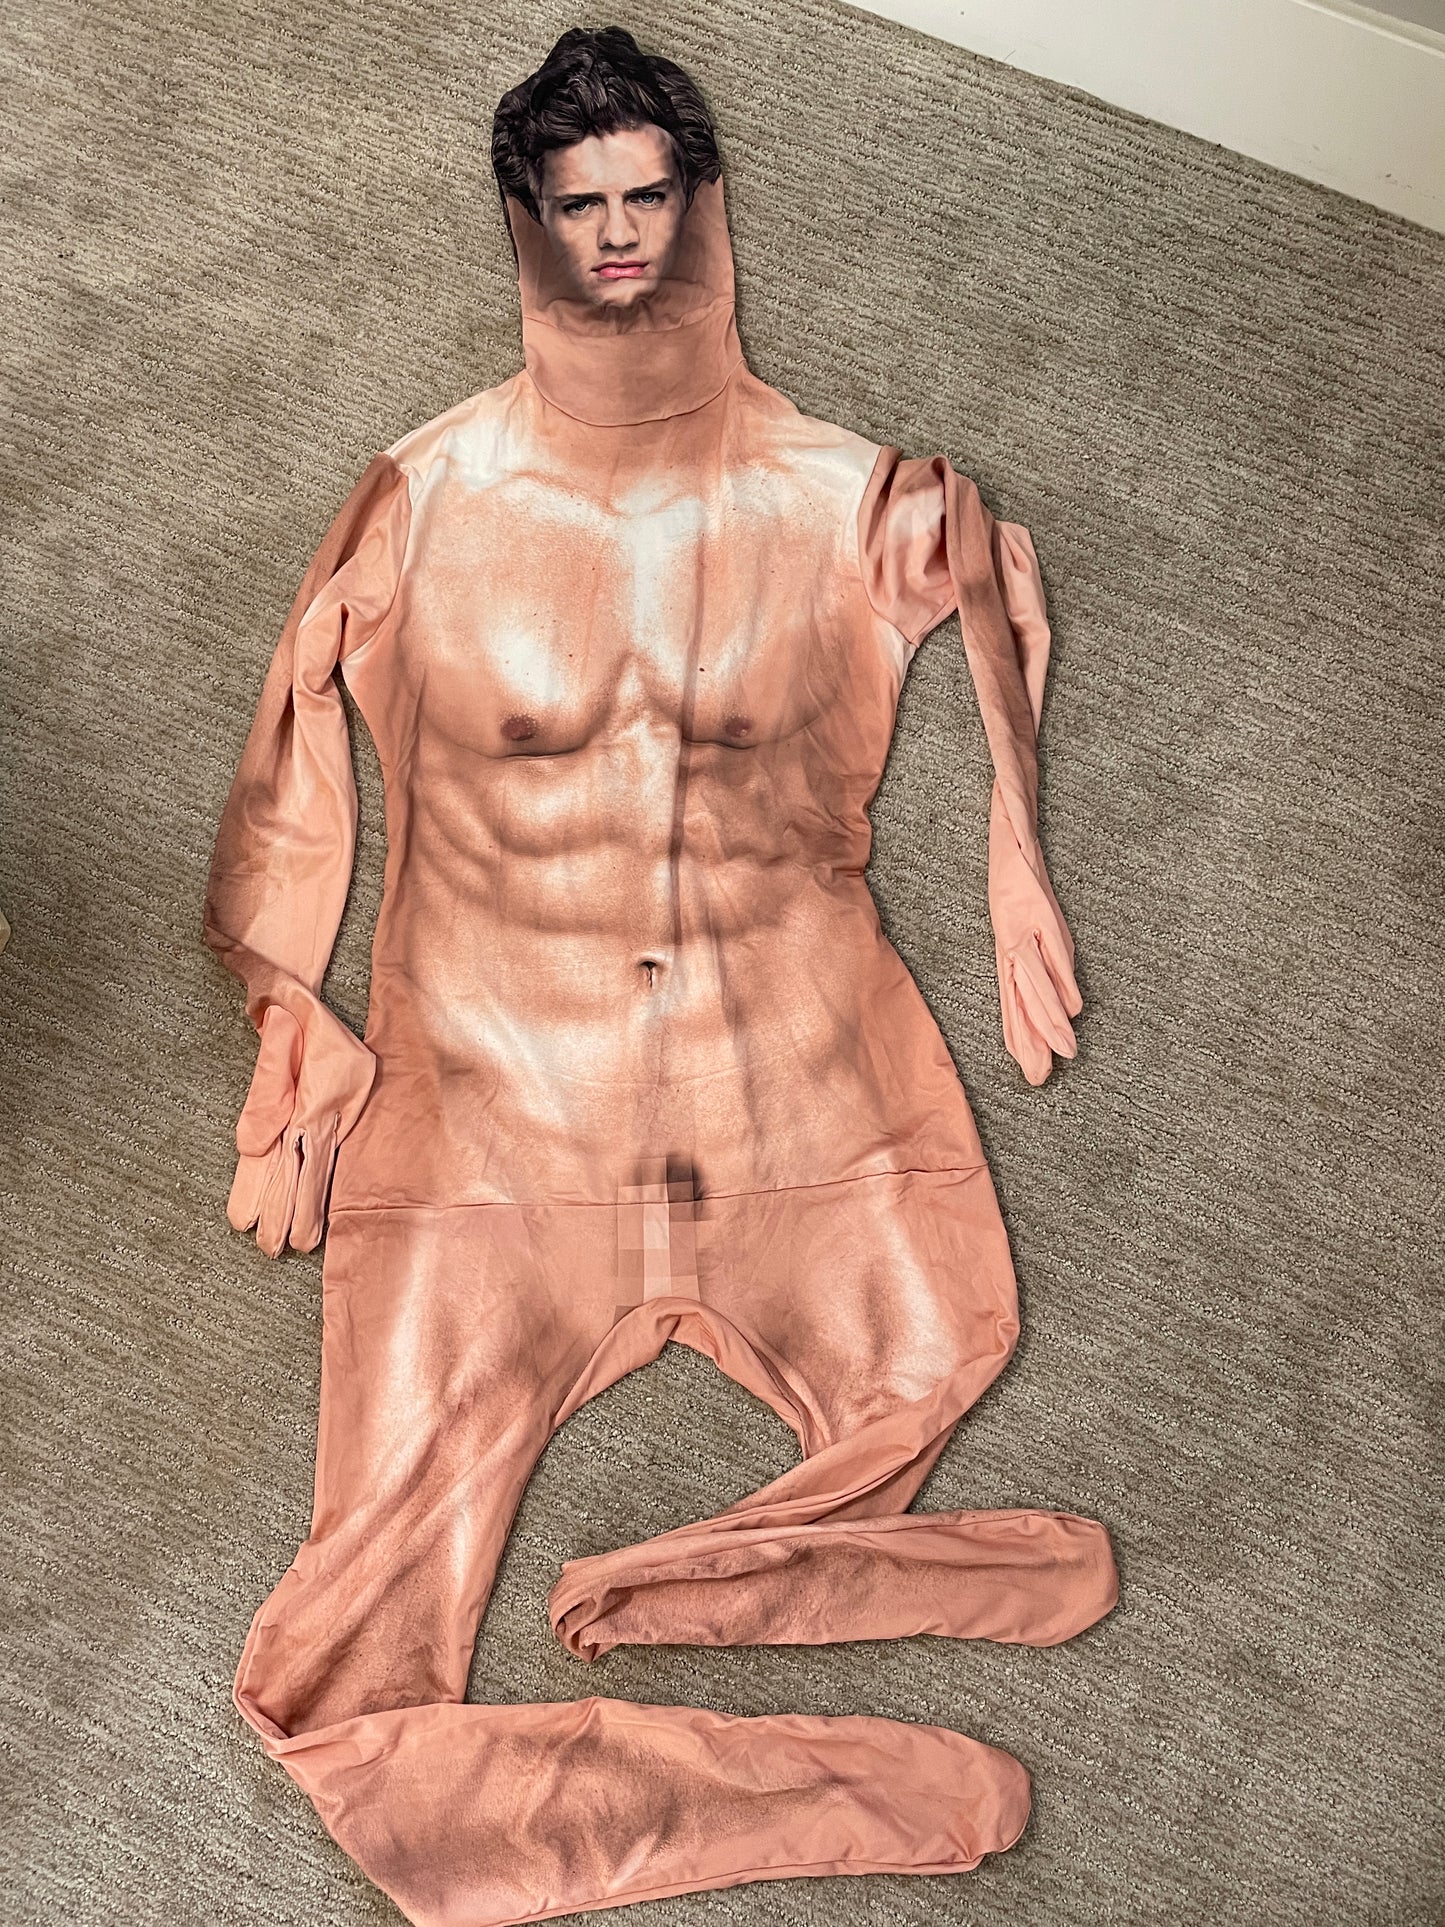 MorphSuits Naked Censored Sexy Man